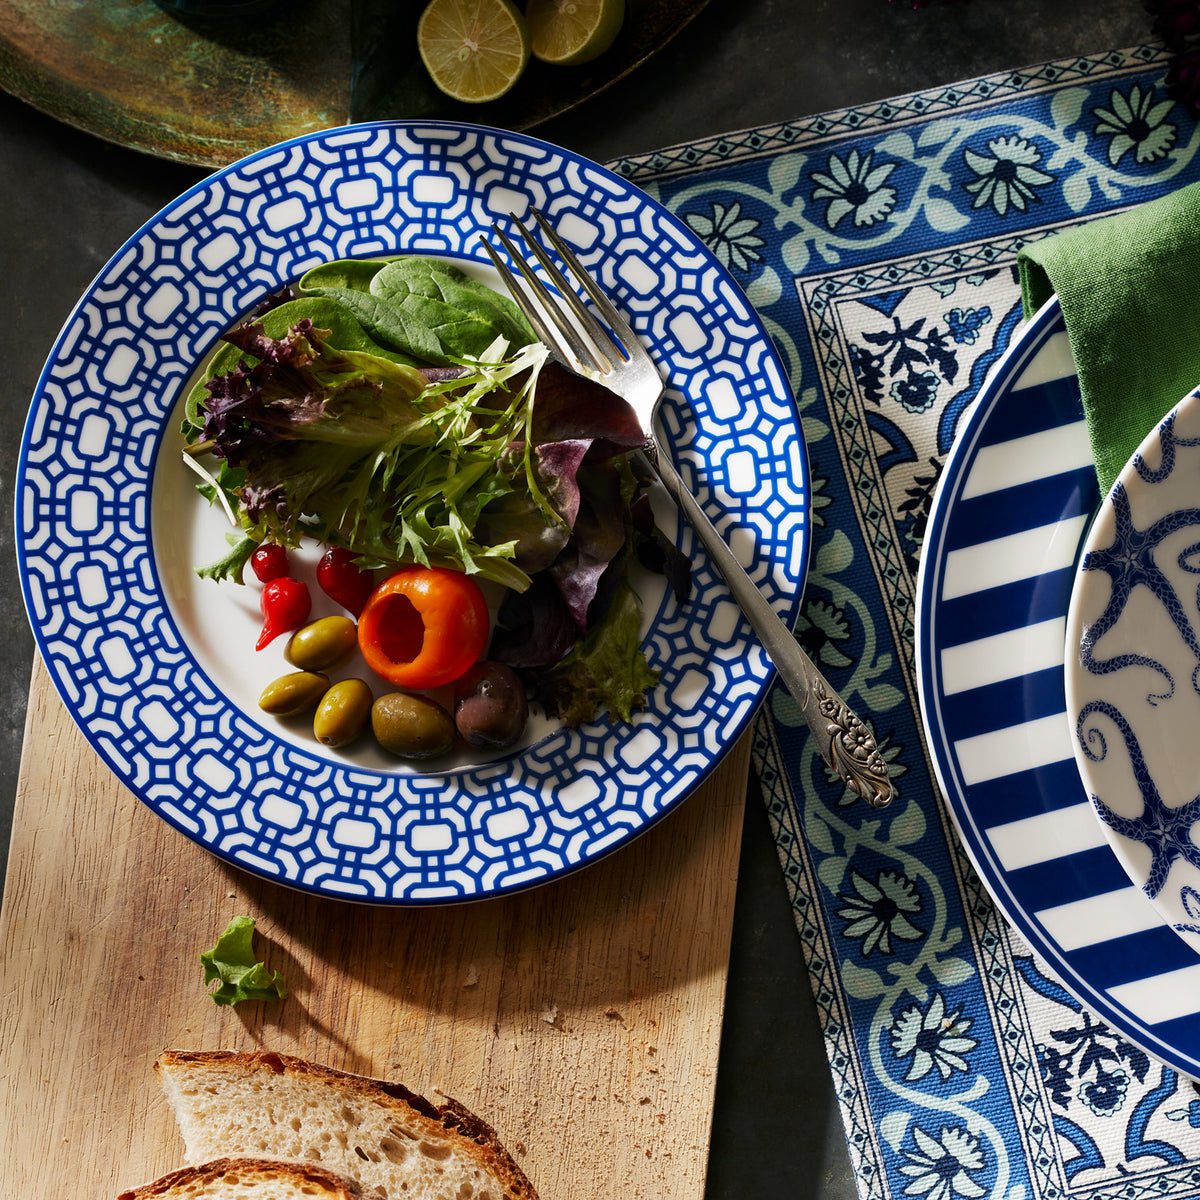 A decorated plate with a fresh salad, including mixed greens, red peppers, and olives, is placed on a wooden board next to a slice of bread and a Caskata Artisanal Home Newport Garden Gate Rimmed Salad Plate on an interlocking lattice pattern tablecloth.